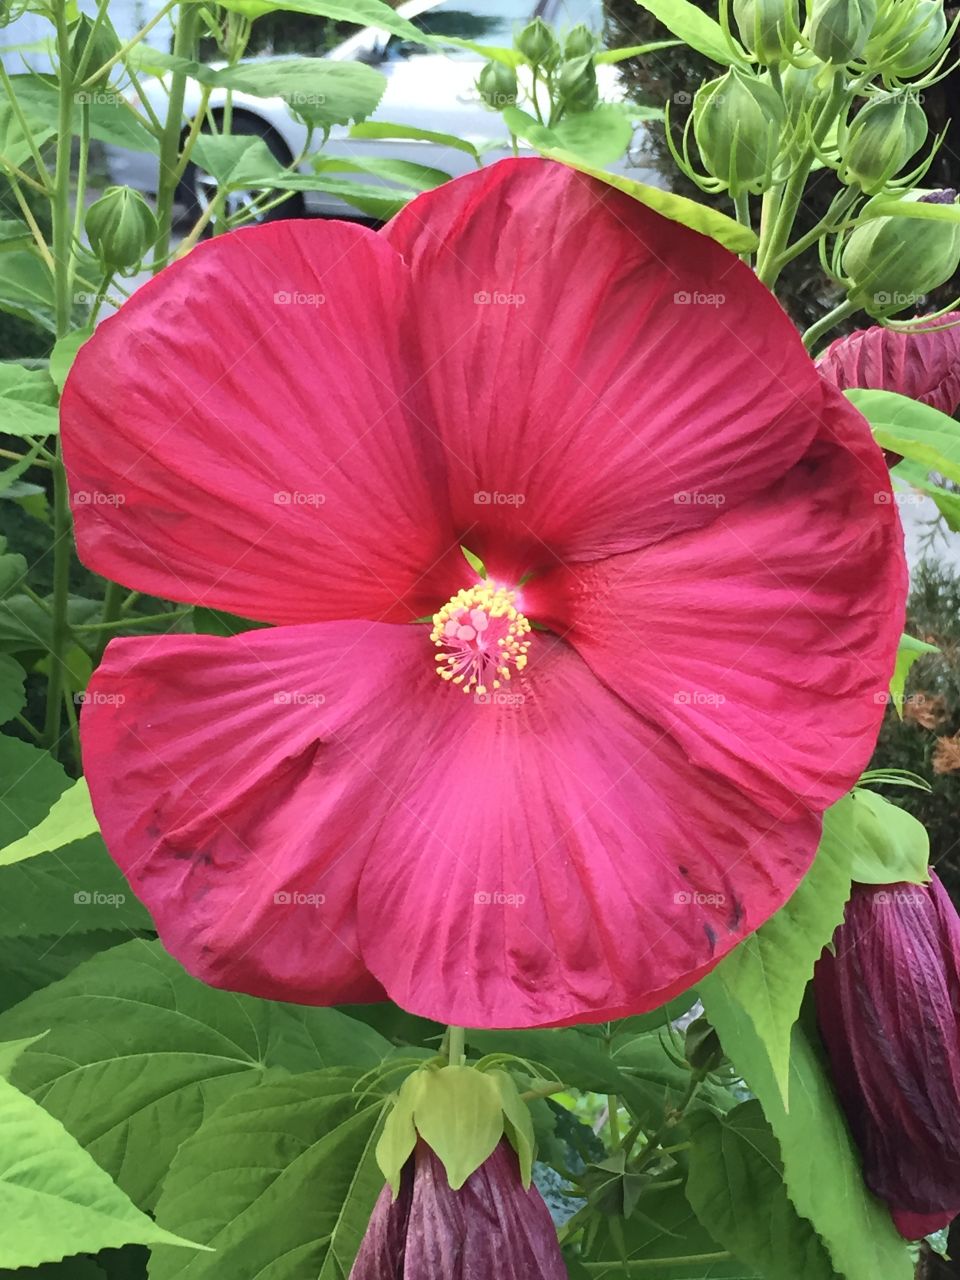 Large 8" hibiscus bloom
Unusual in NY because it gets very cold here, and hibiscus are not cold hardy